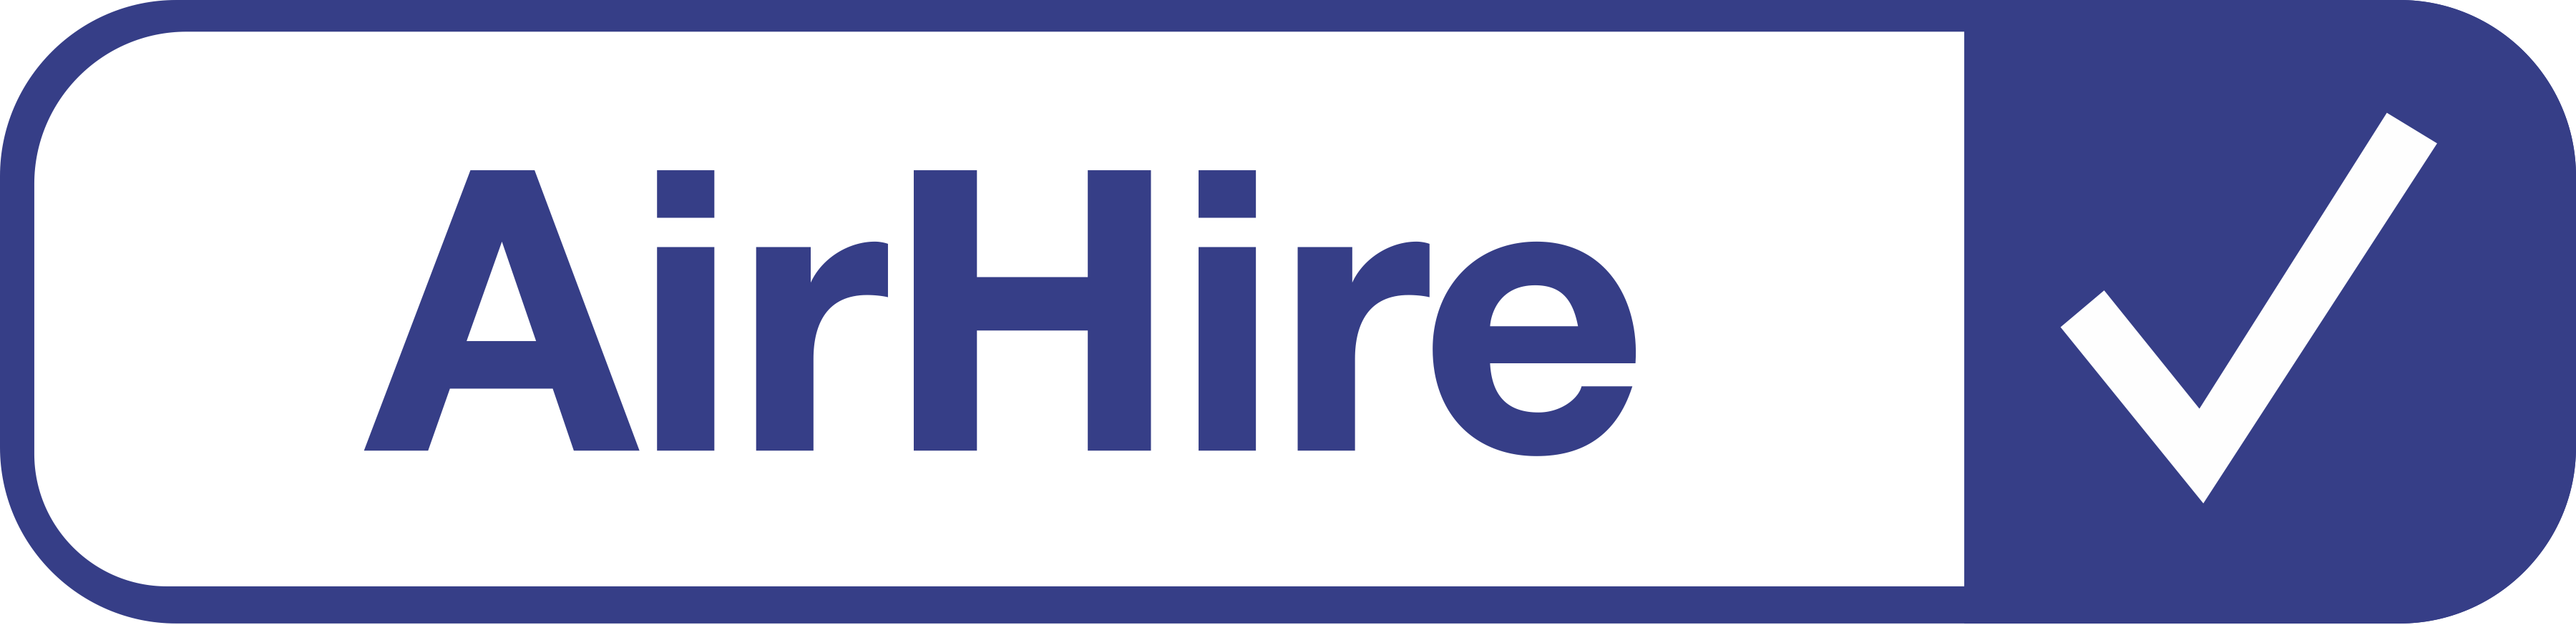 AirHire logo for when people need emergency supply of air or need a loan of an air compressor for a short-term project.